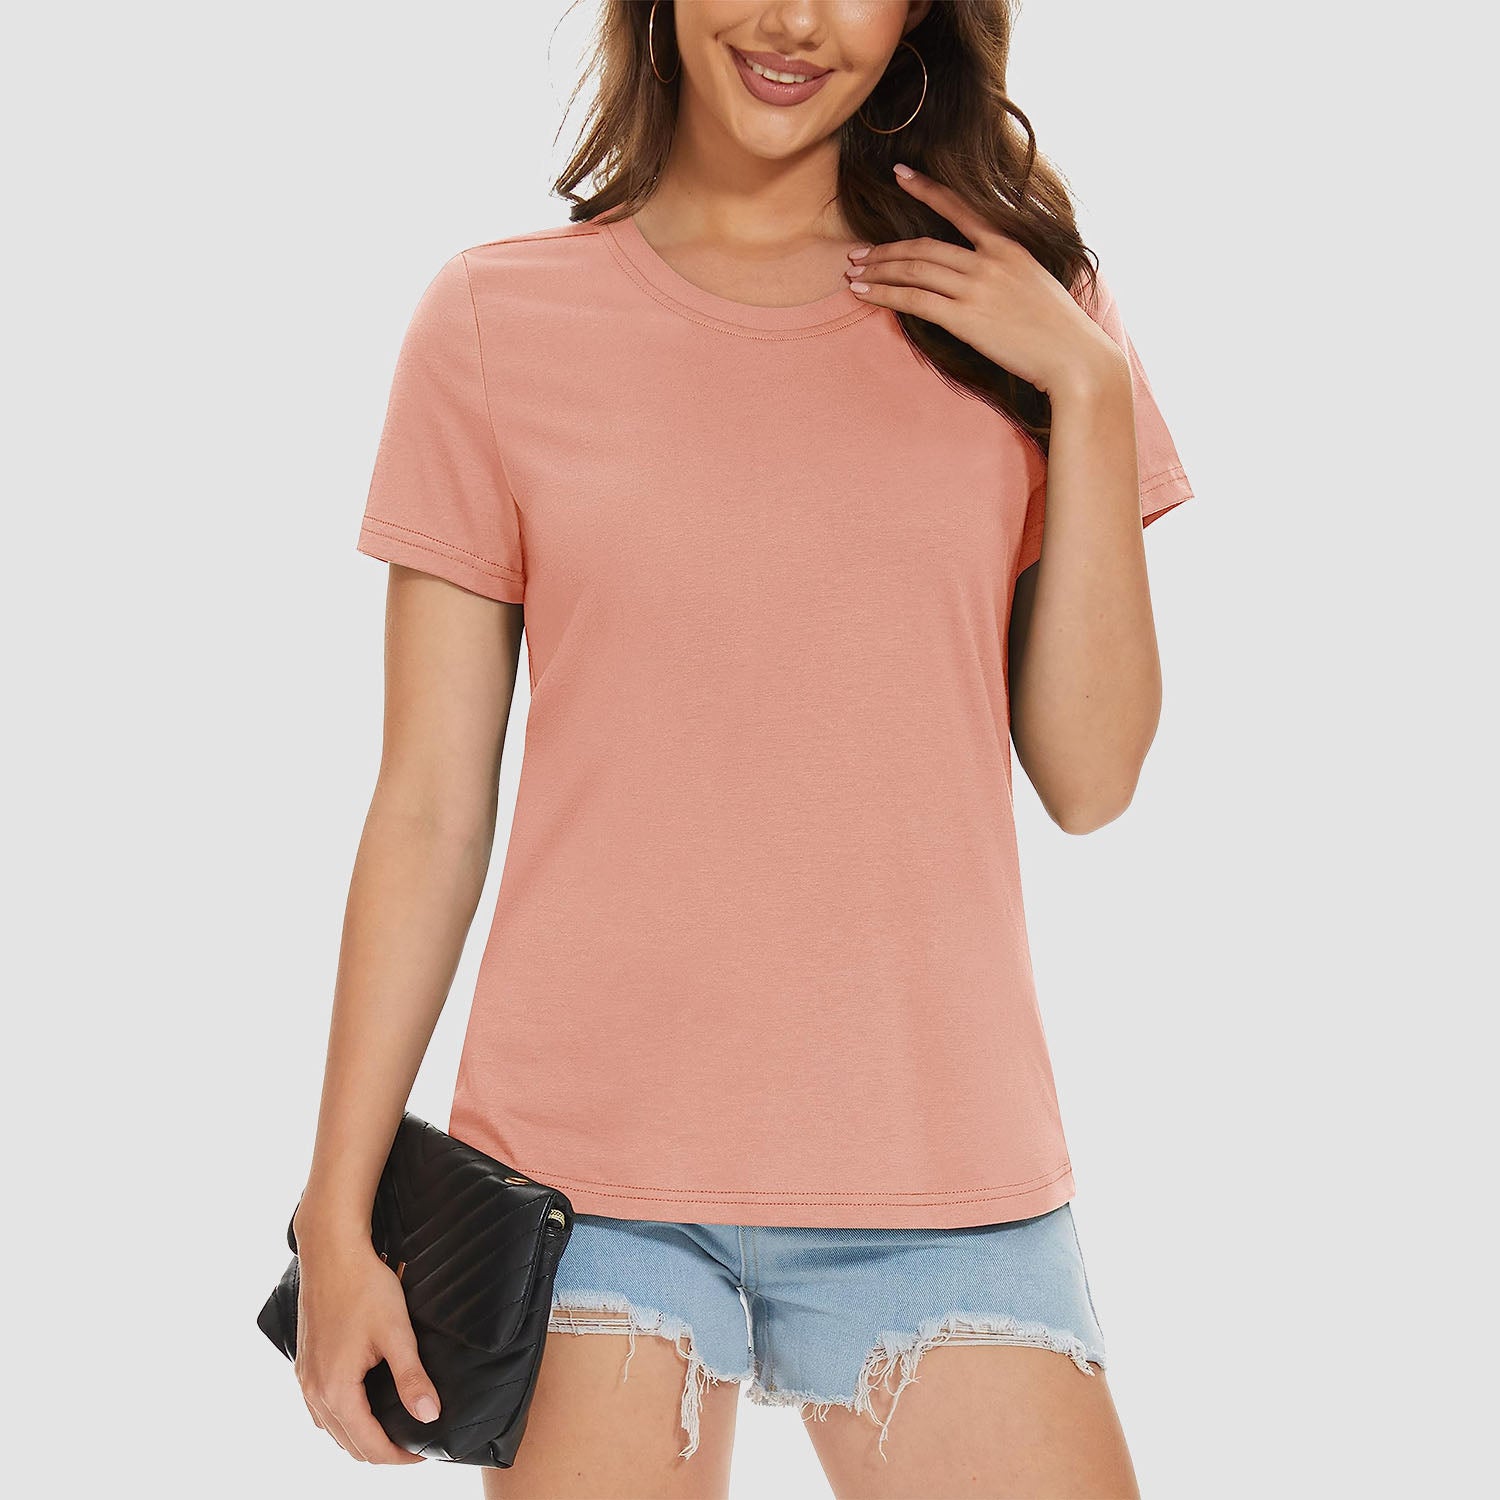 Womens Cotton Crewneck T Shirts Short Sleeve Breathable Basic Tee for Women Summer Casual Tops